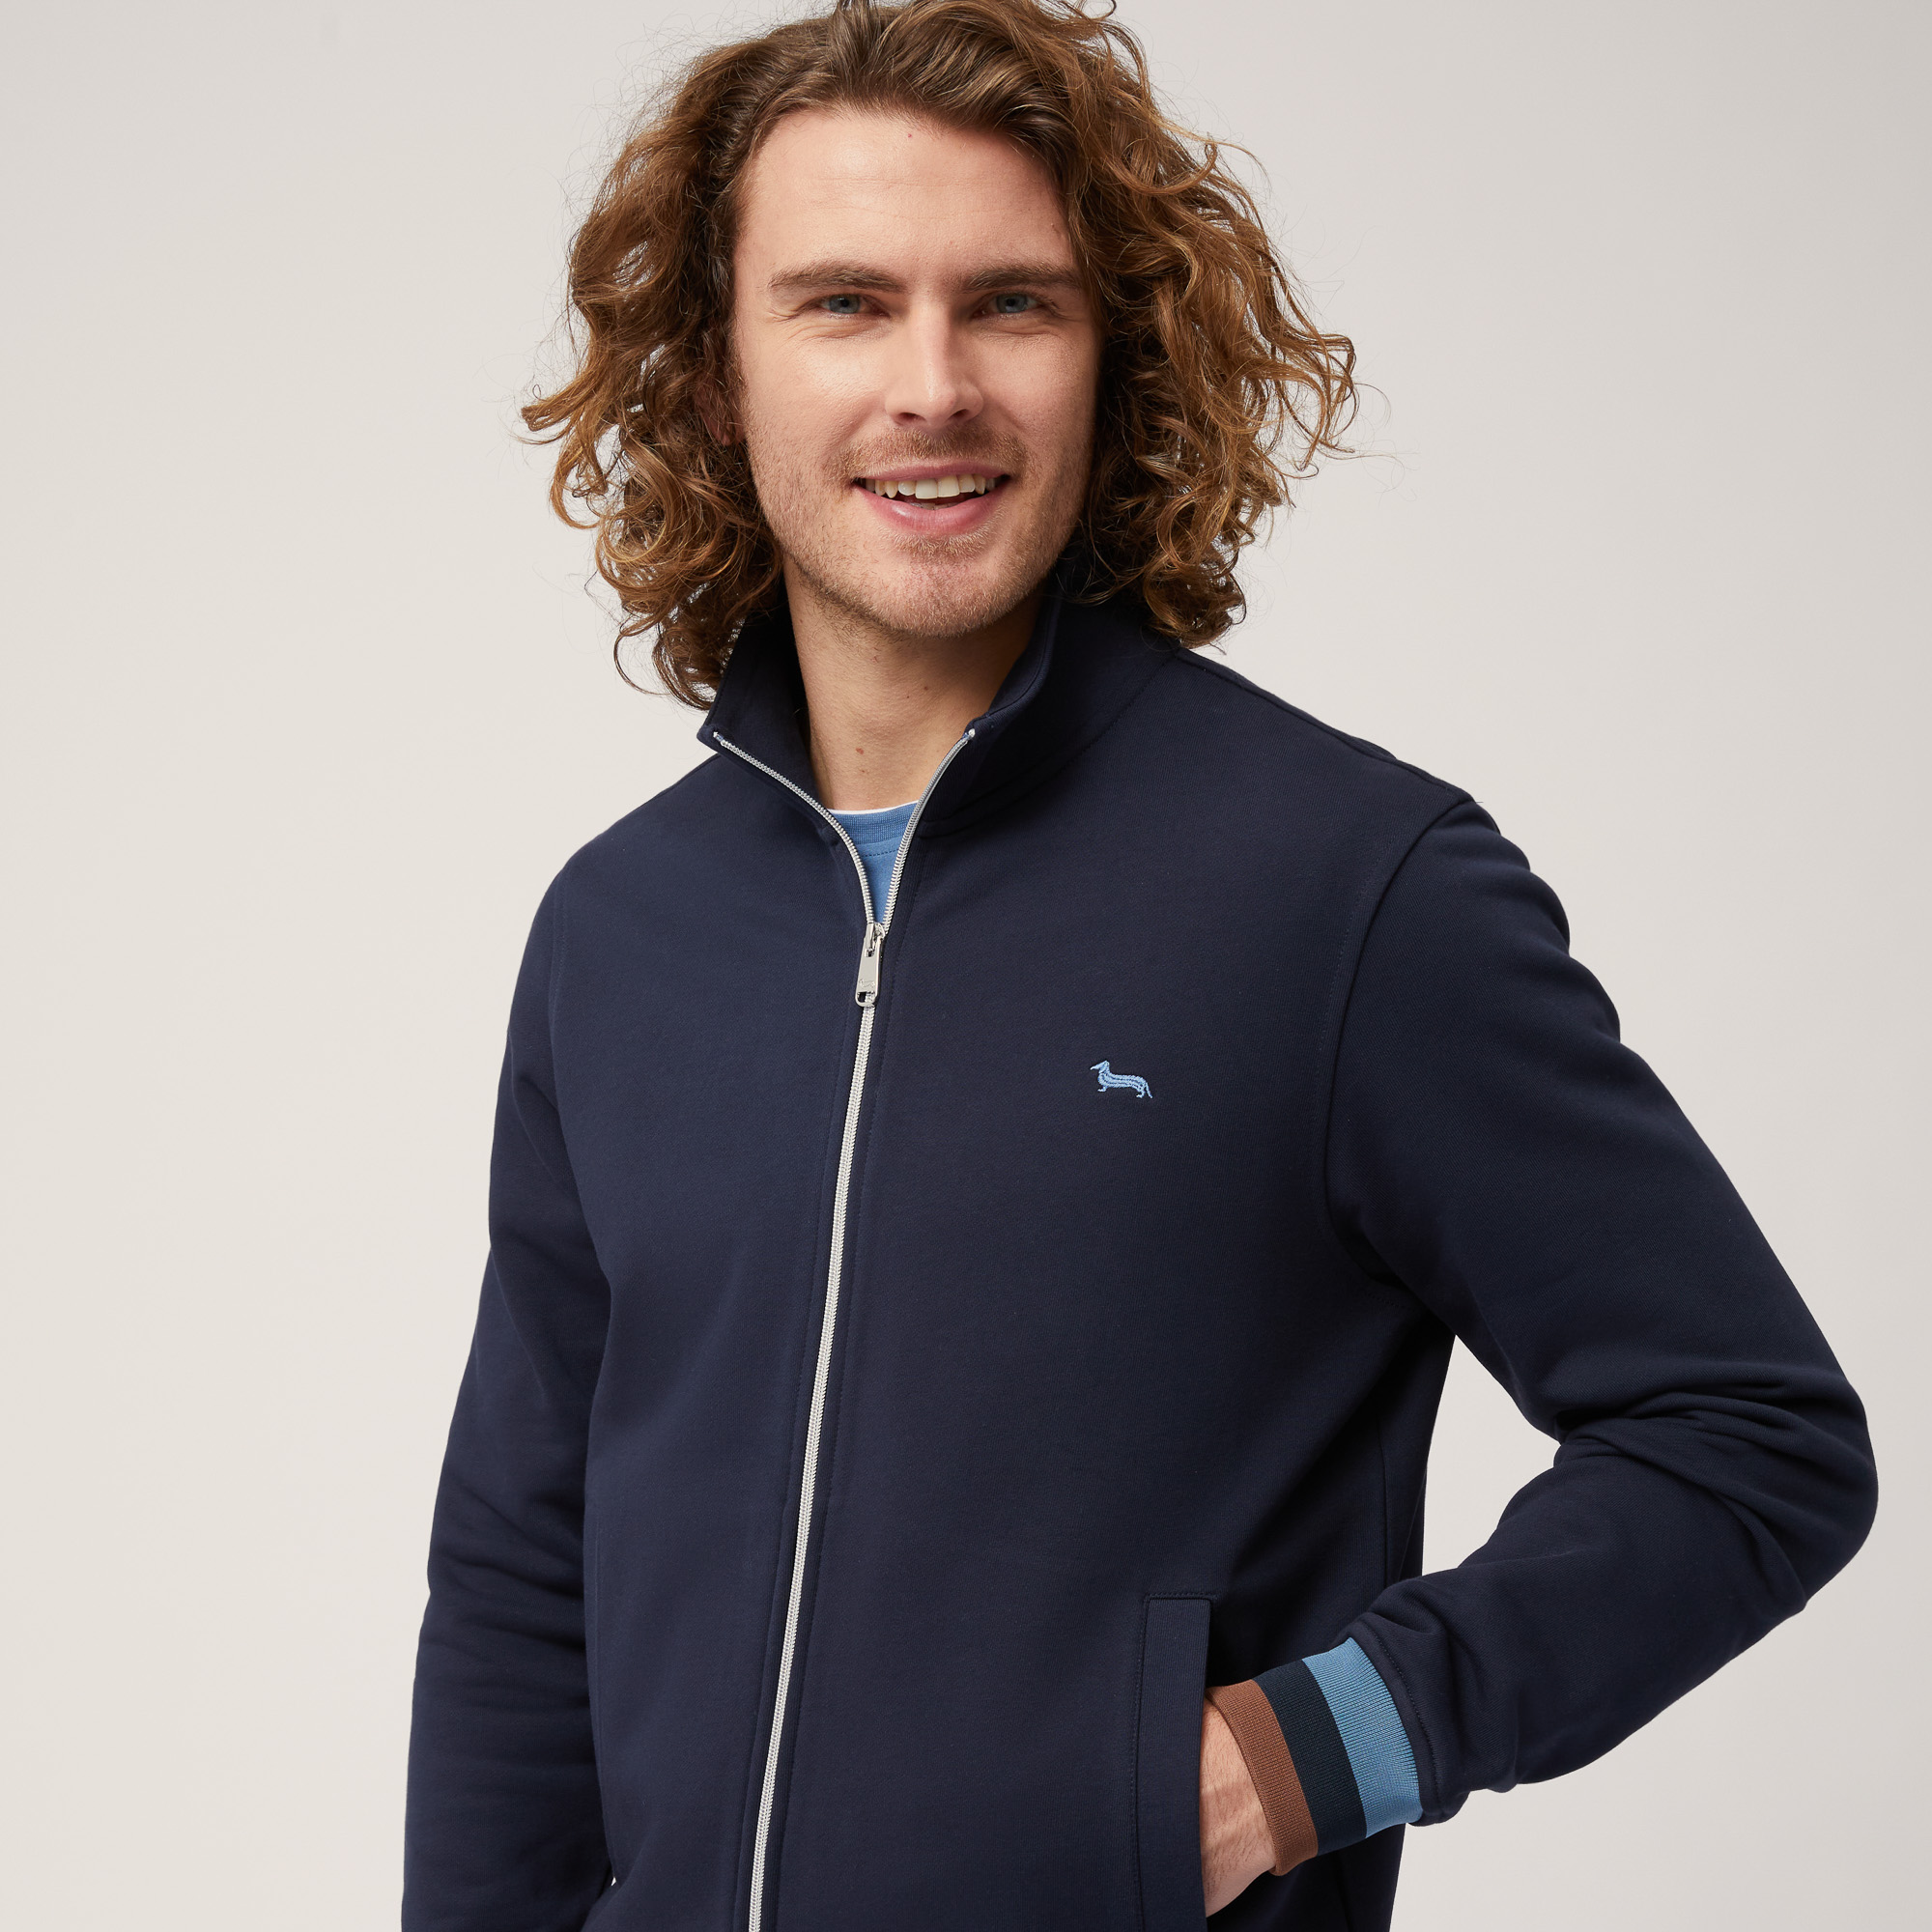 Cotton Full-Zip Sweatshirt with Striped Details, Blue, large image number 2